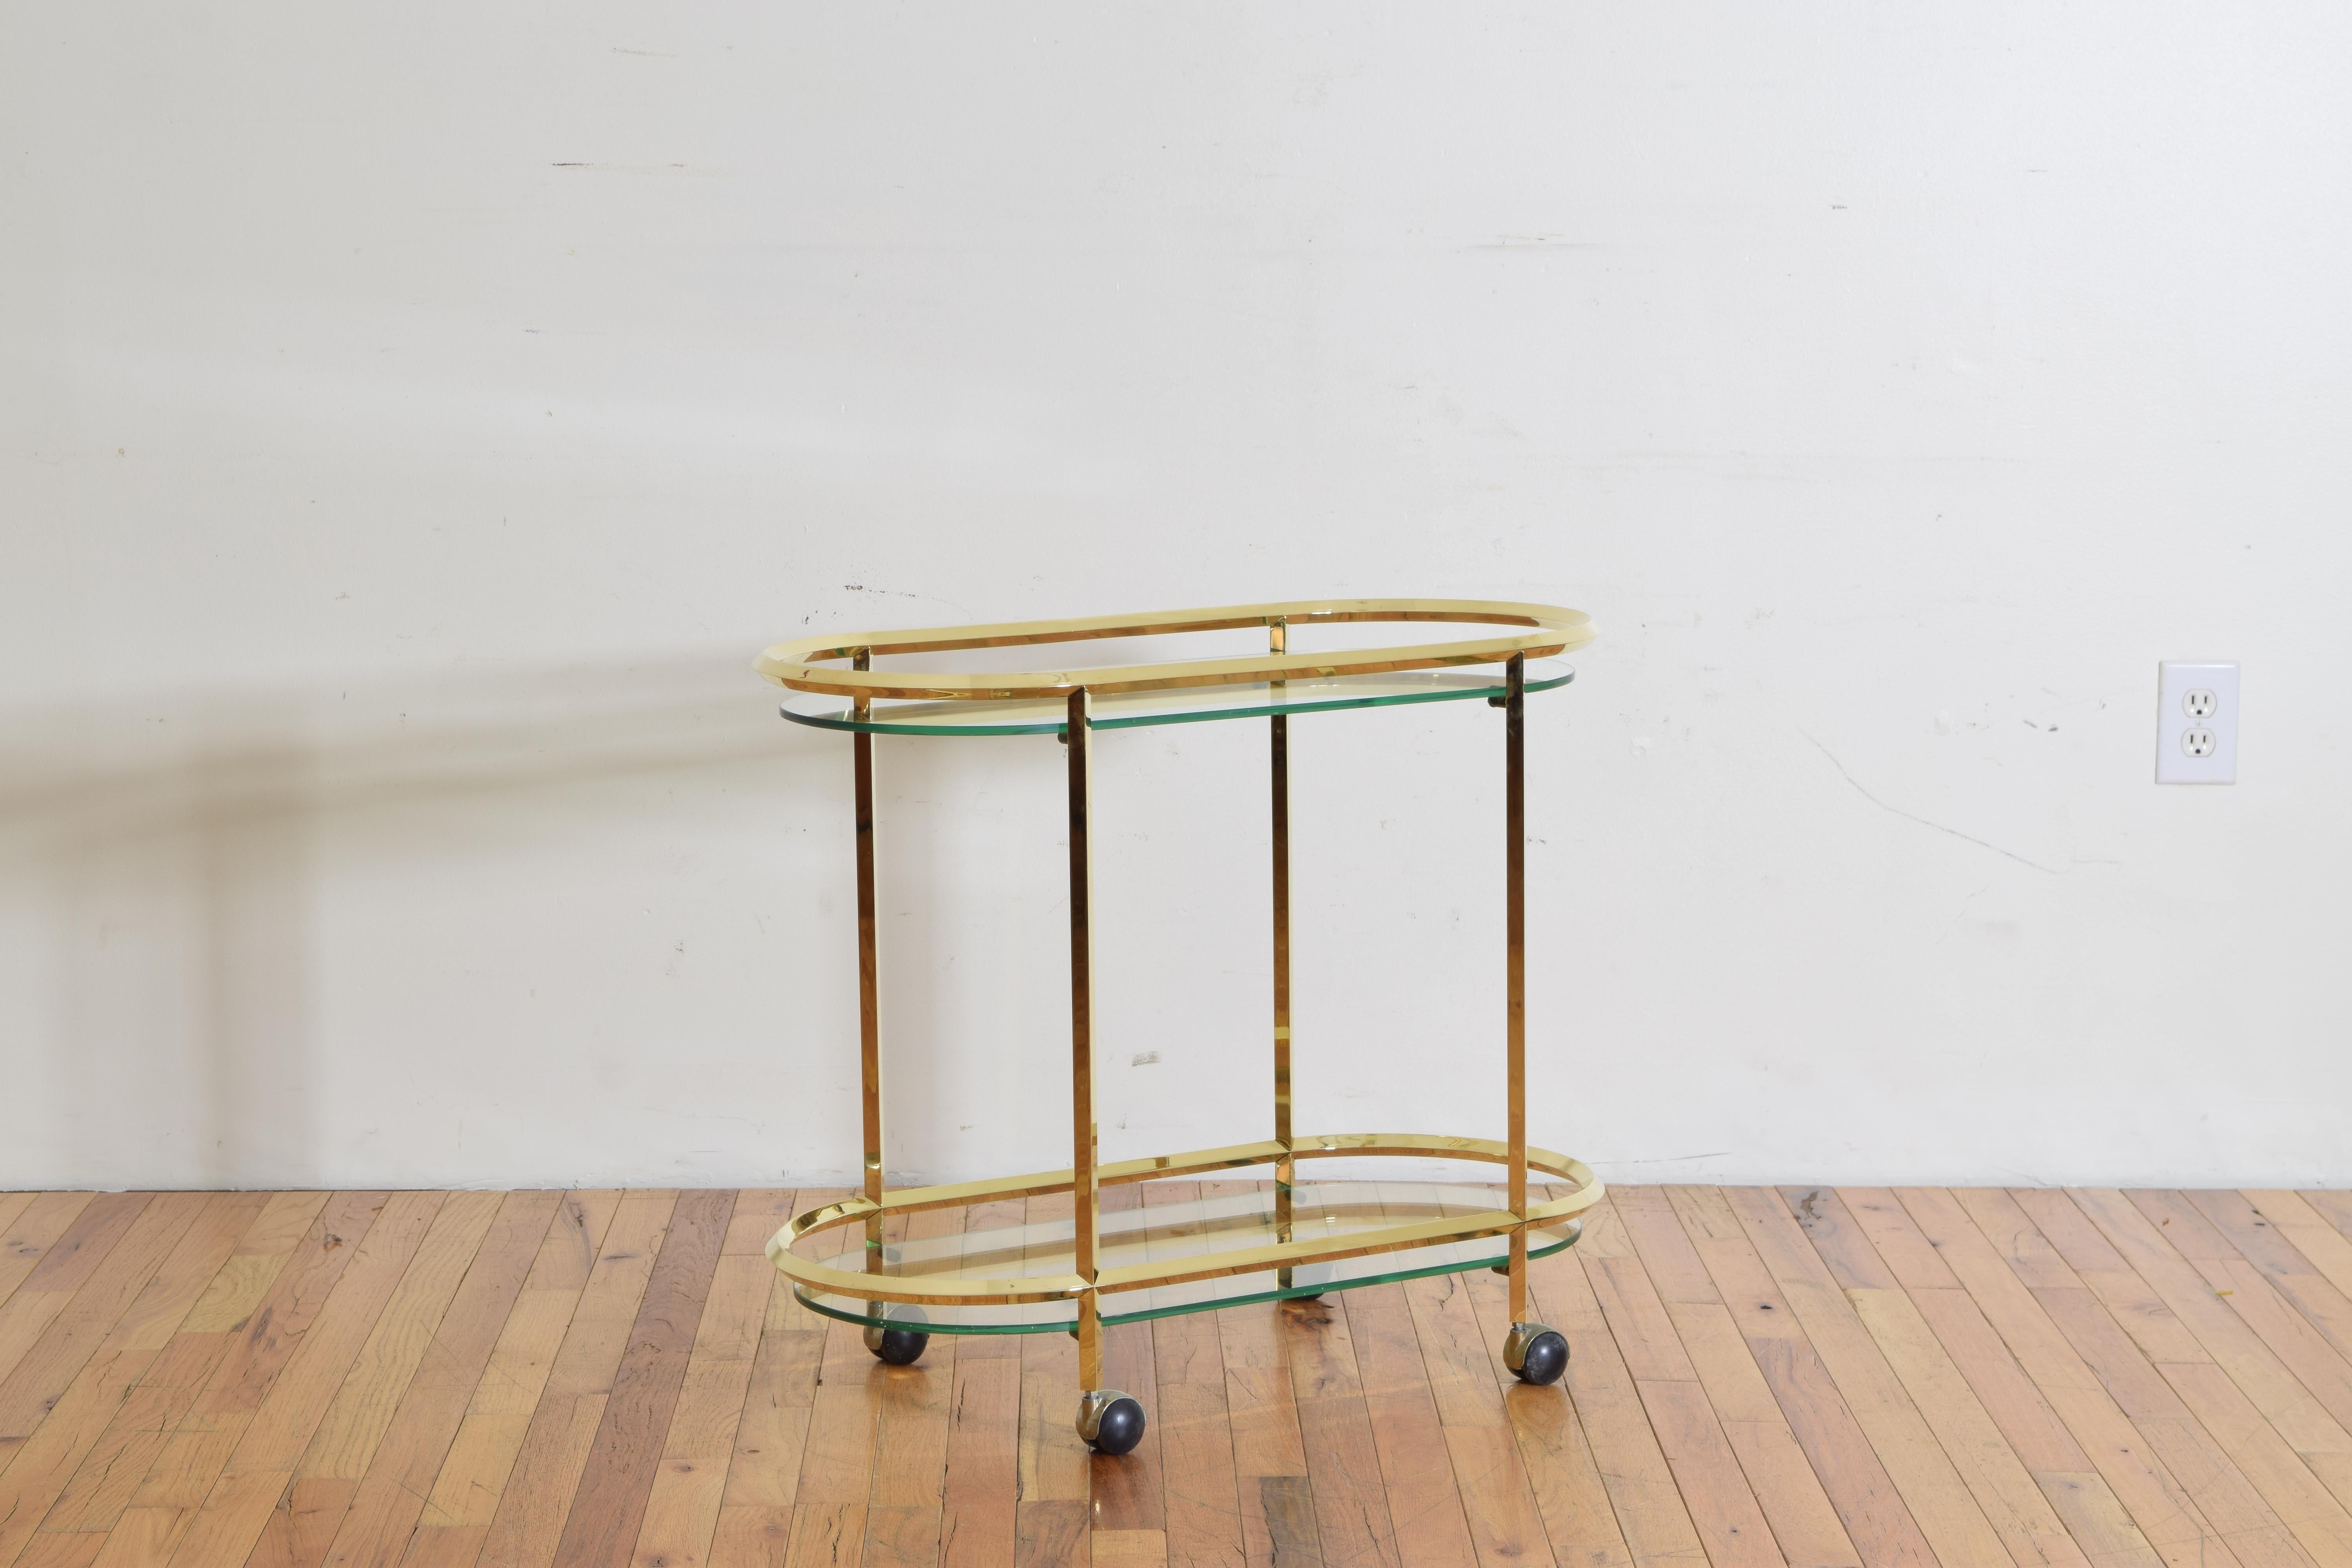 The bar cart is of disco rectangular shape and having two horizontal tiers joined by four vertical supports, each level having a thick conforming piece of glass slightly below, raised on original brass and plastic feet.